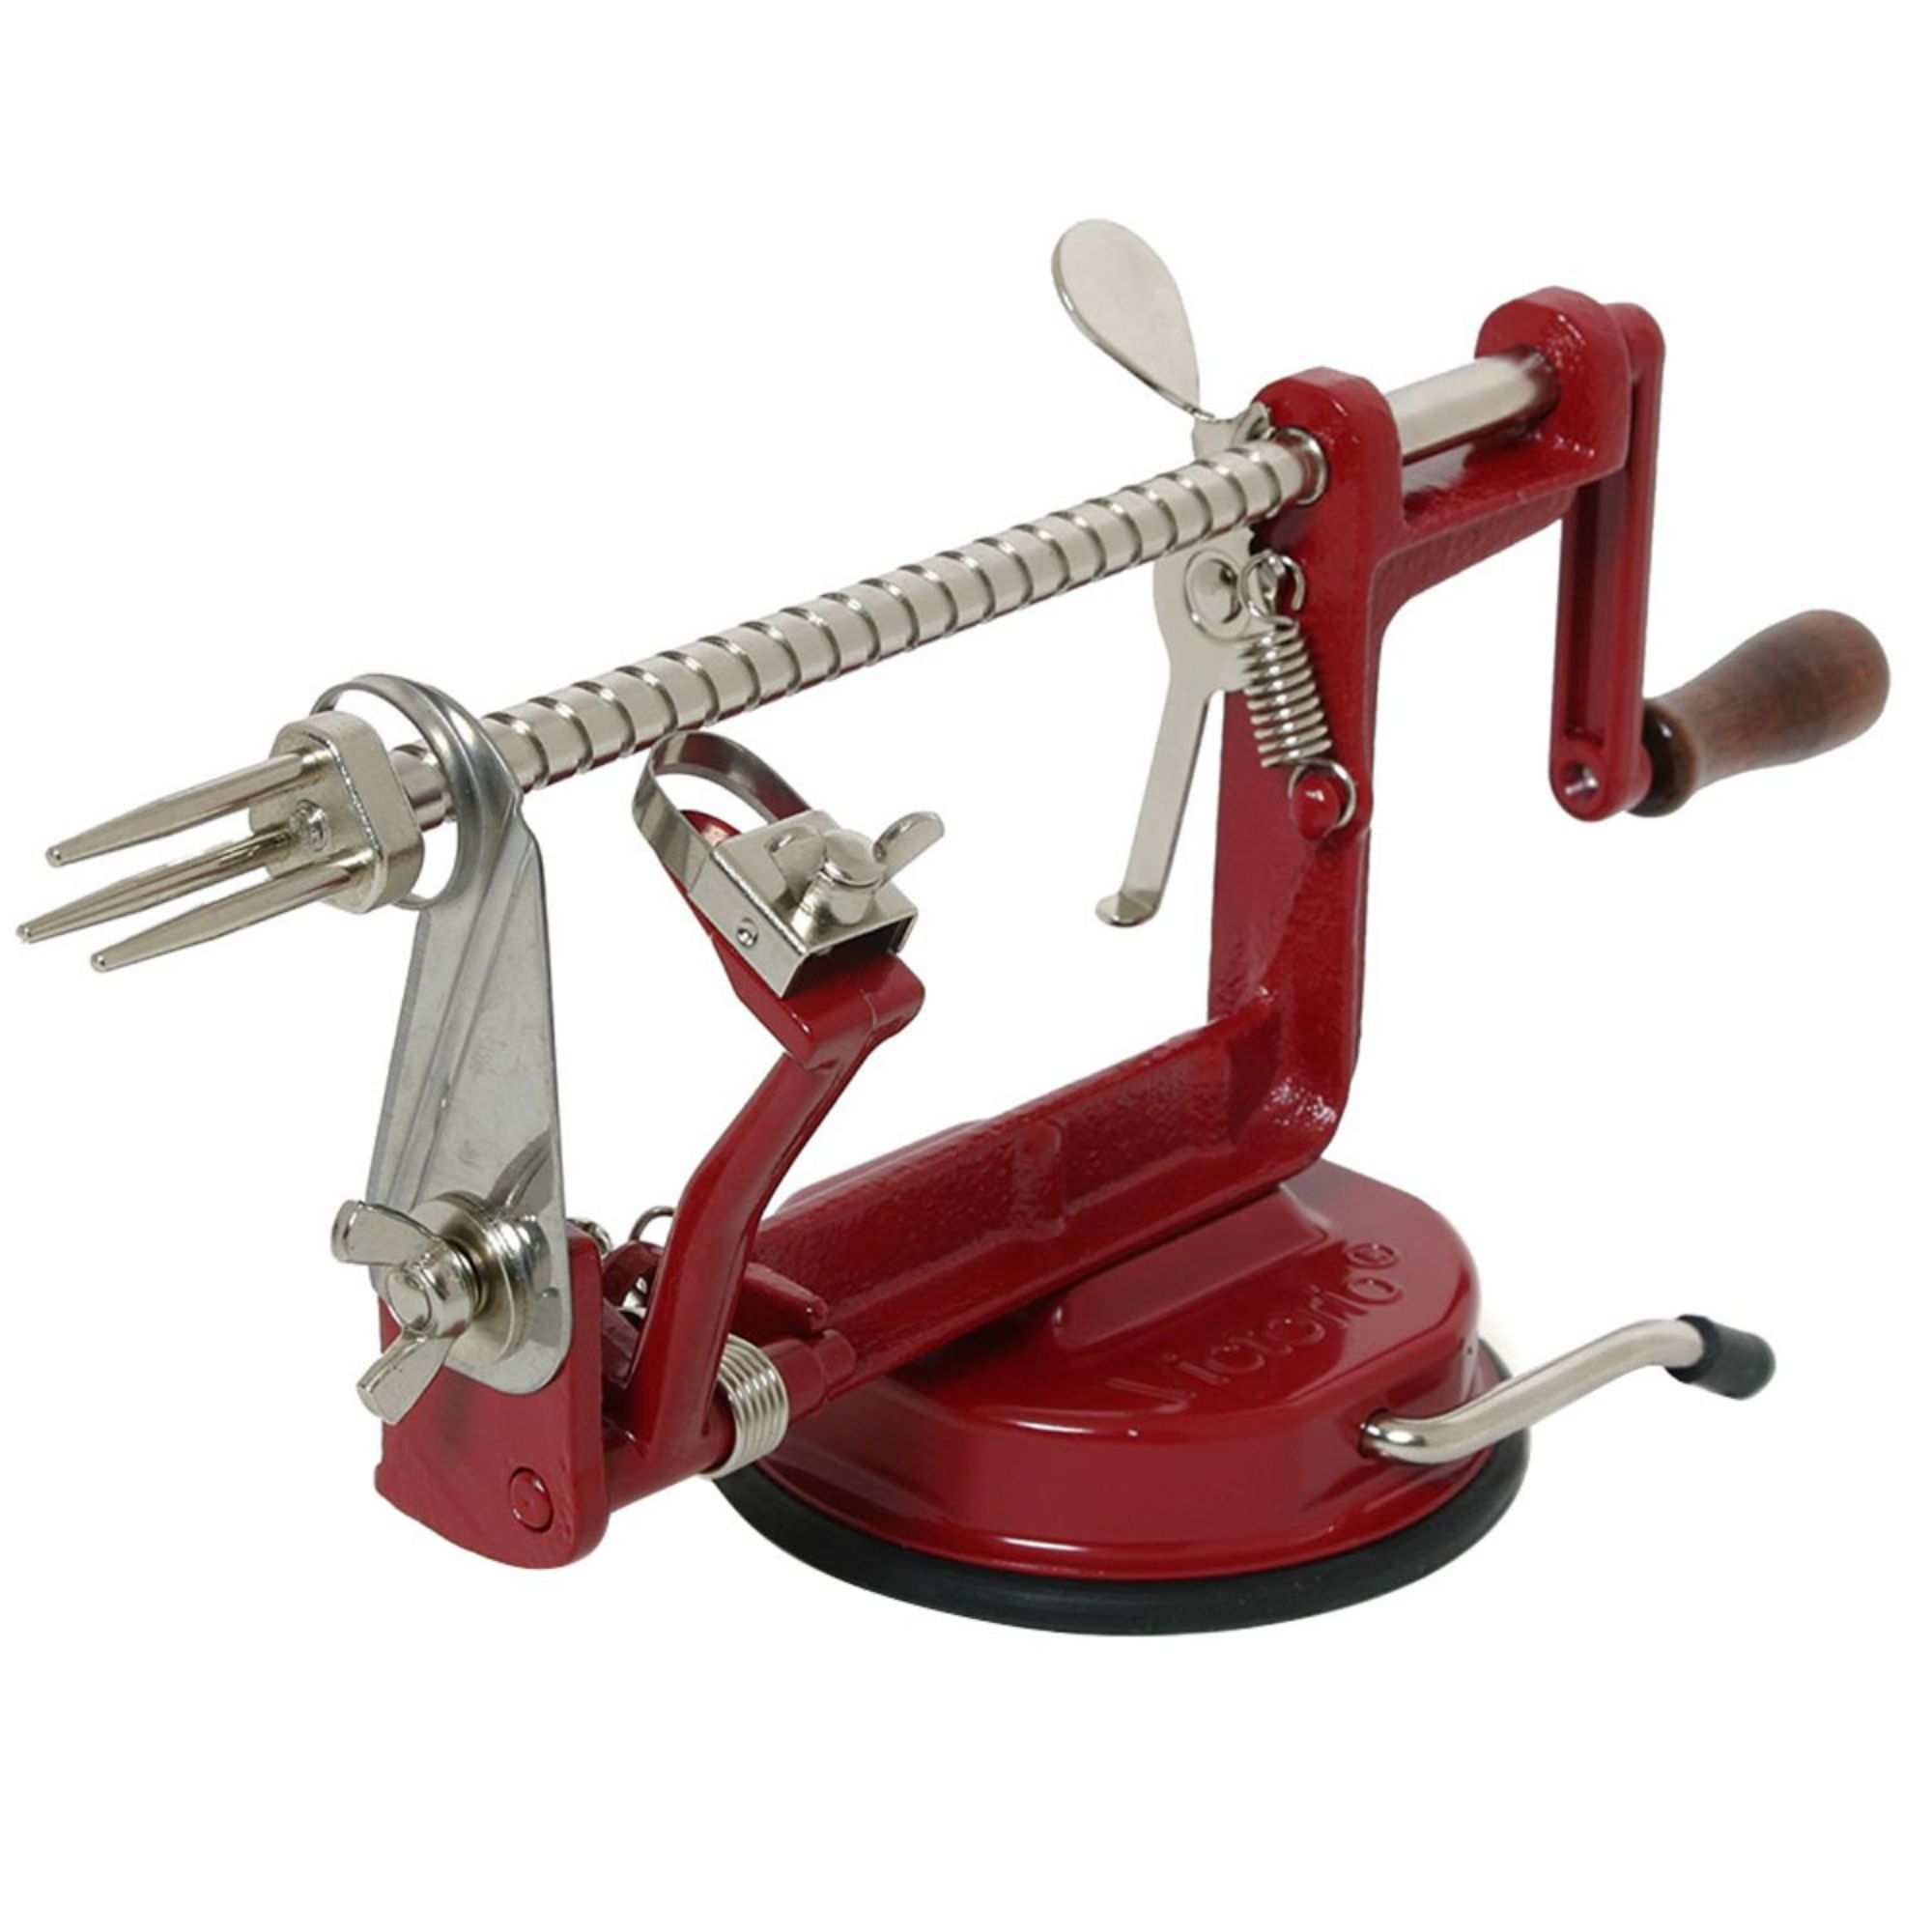 Thin Apple Slicer - The Peppermill